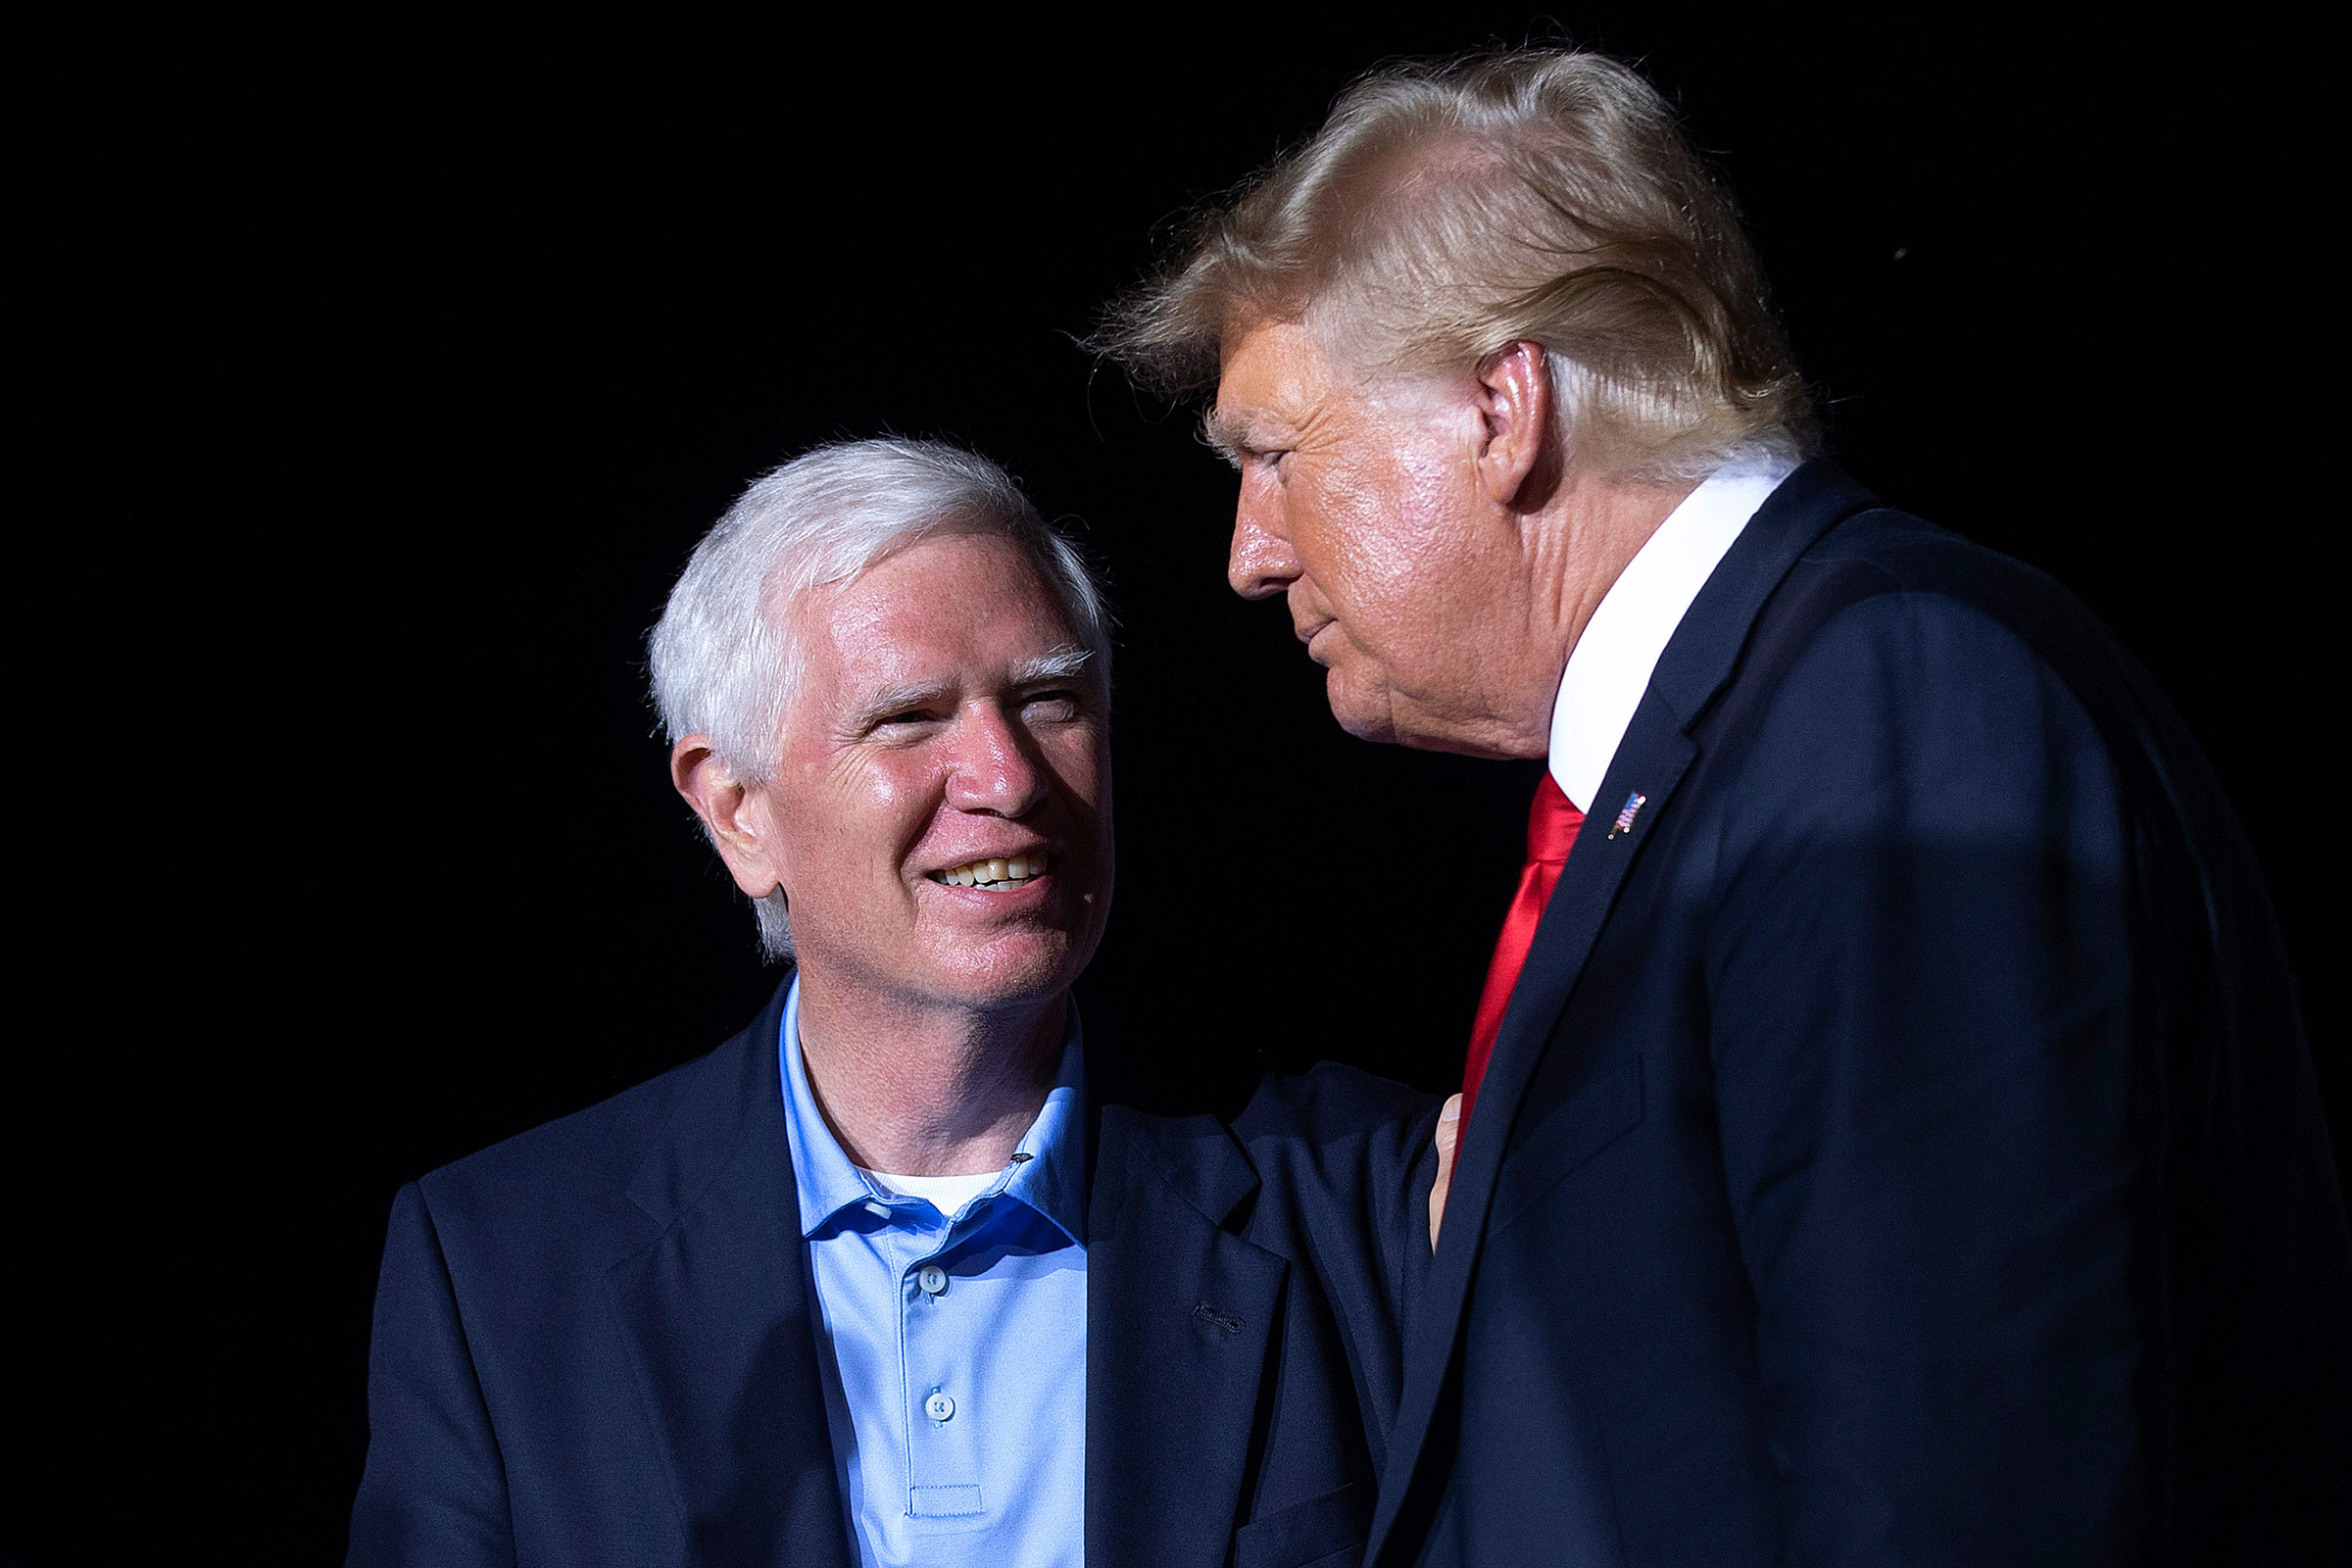 Former President Donald Trump welcomes candidate for Senate and Rep. Mo Brooks to the stage during a "Save America" rally at York Family Farms on in Cullman, Ala. on Aug. 21, 2021. (Chip Somodevilla—Getty Images)